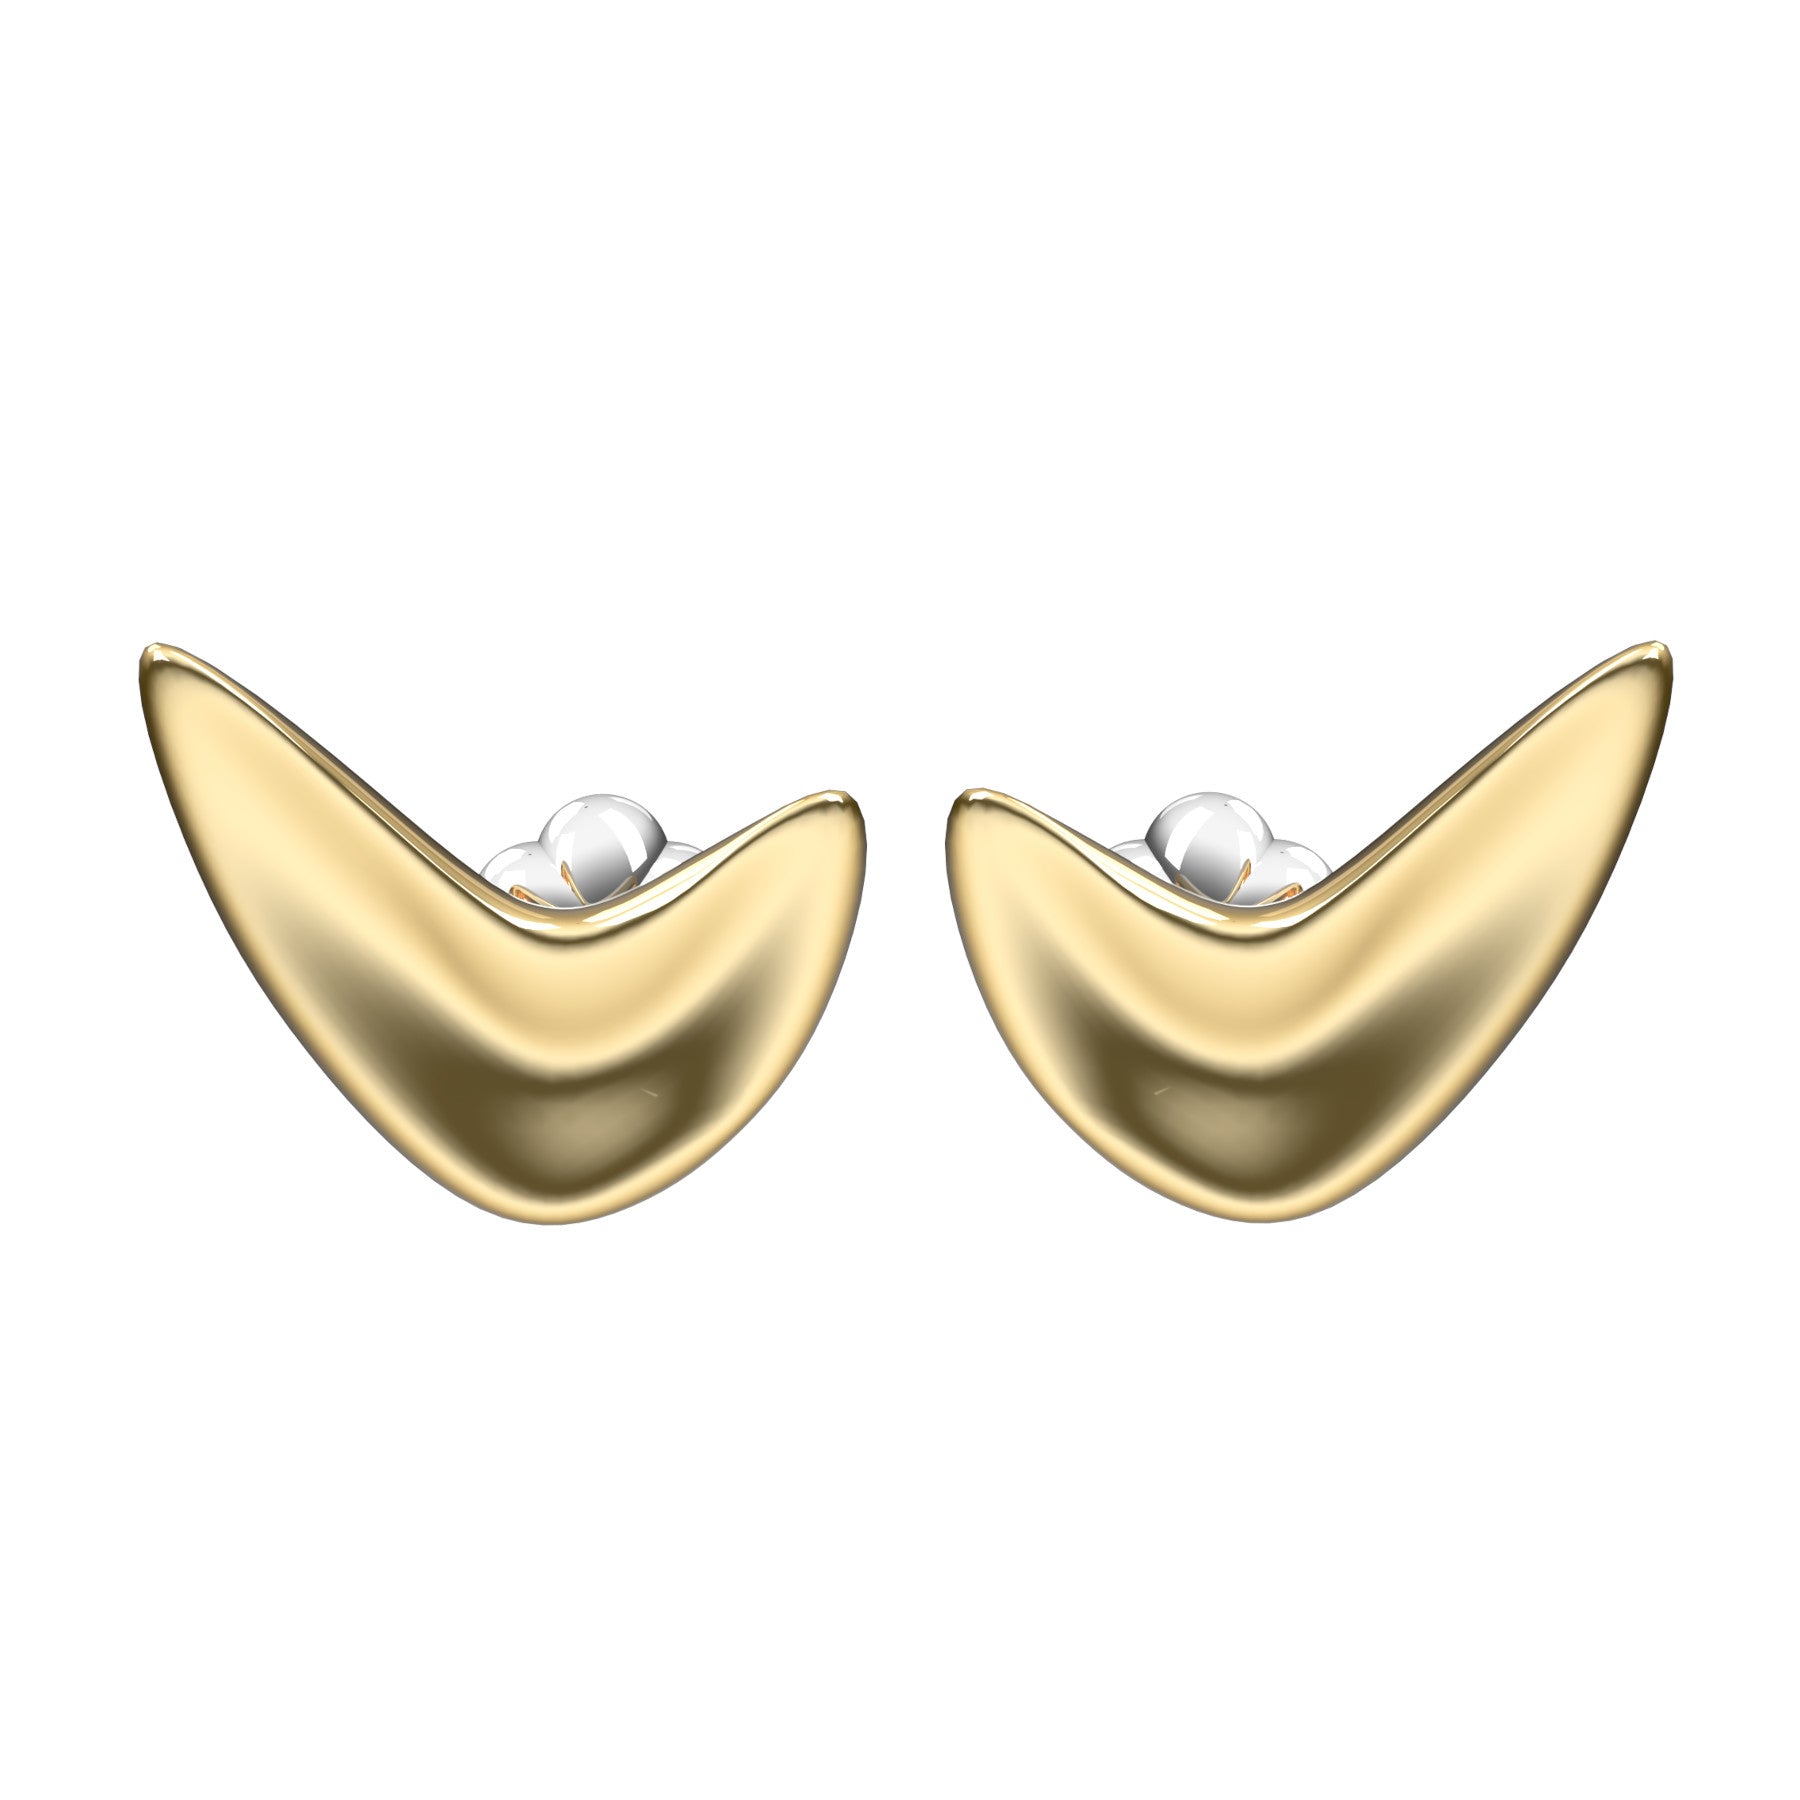 lobe earring, 18 K yellow gold, weight about 10,6 g. (0.37 oz) size 23x19x6 mm